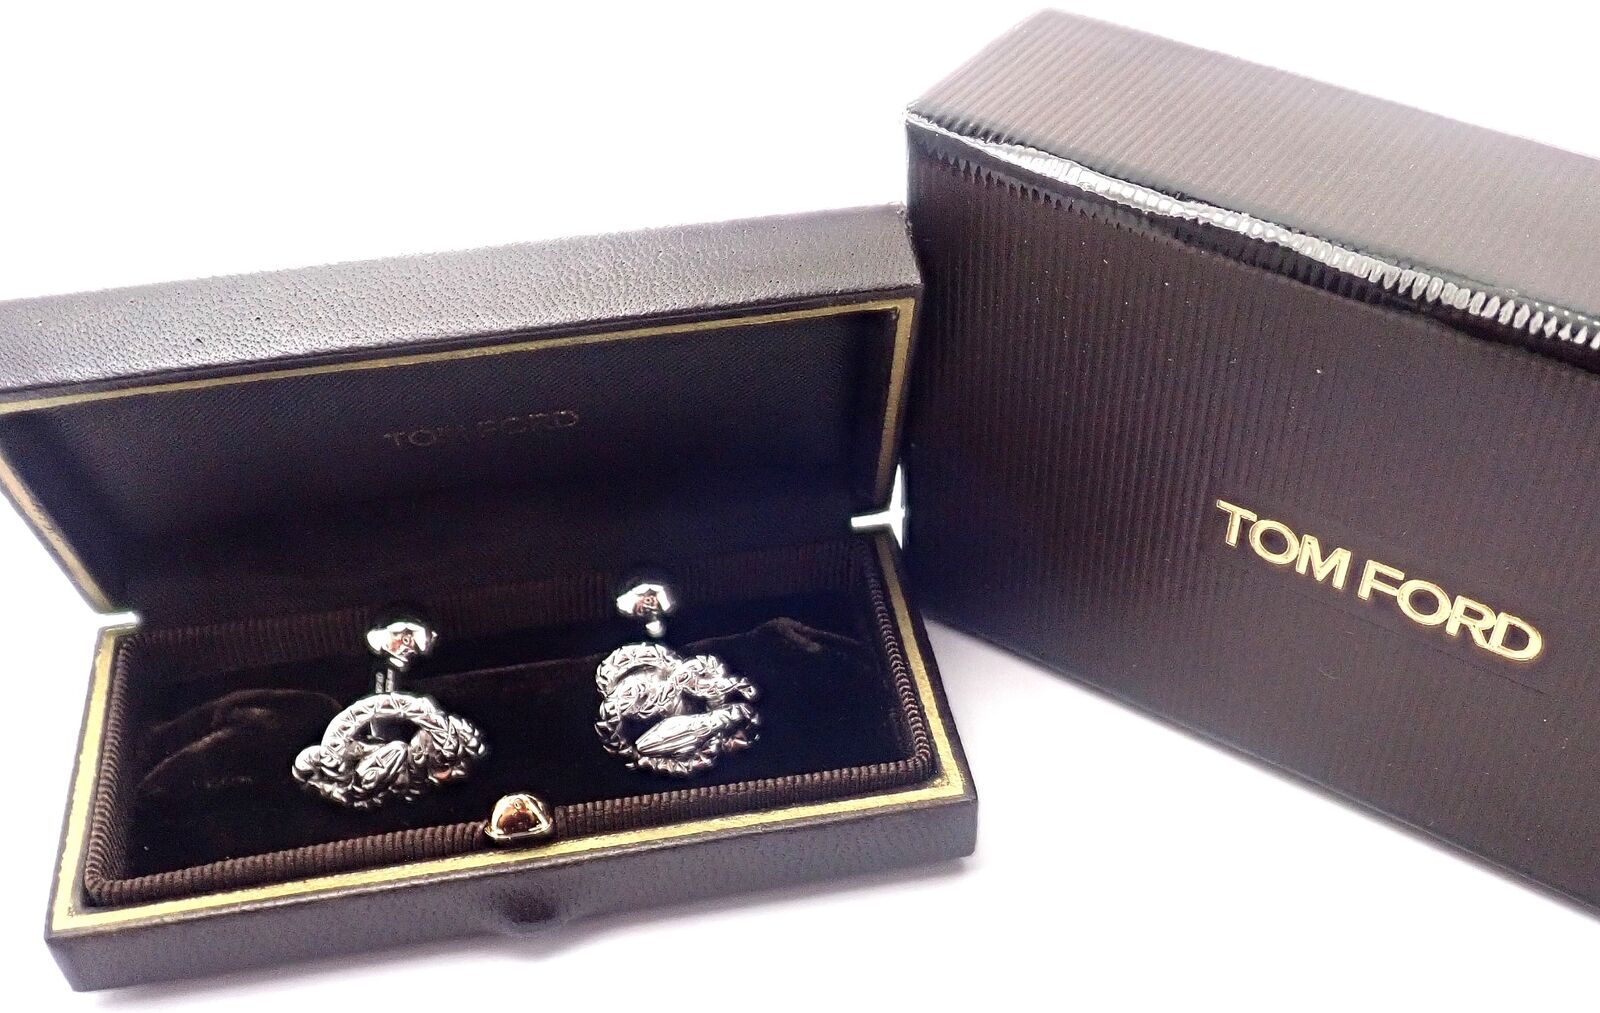 Tom Ford Jewelry & Watches:Men's Jewelry:Cufflinks Rare! Authentic Tom Ford 18k White Gold Snake Cufflinks Box